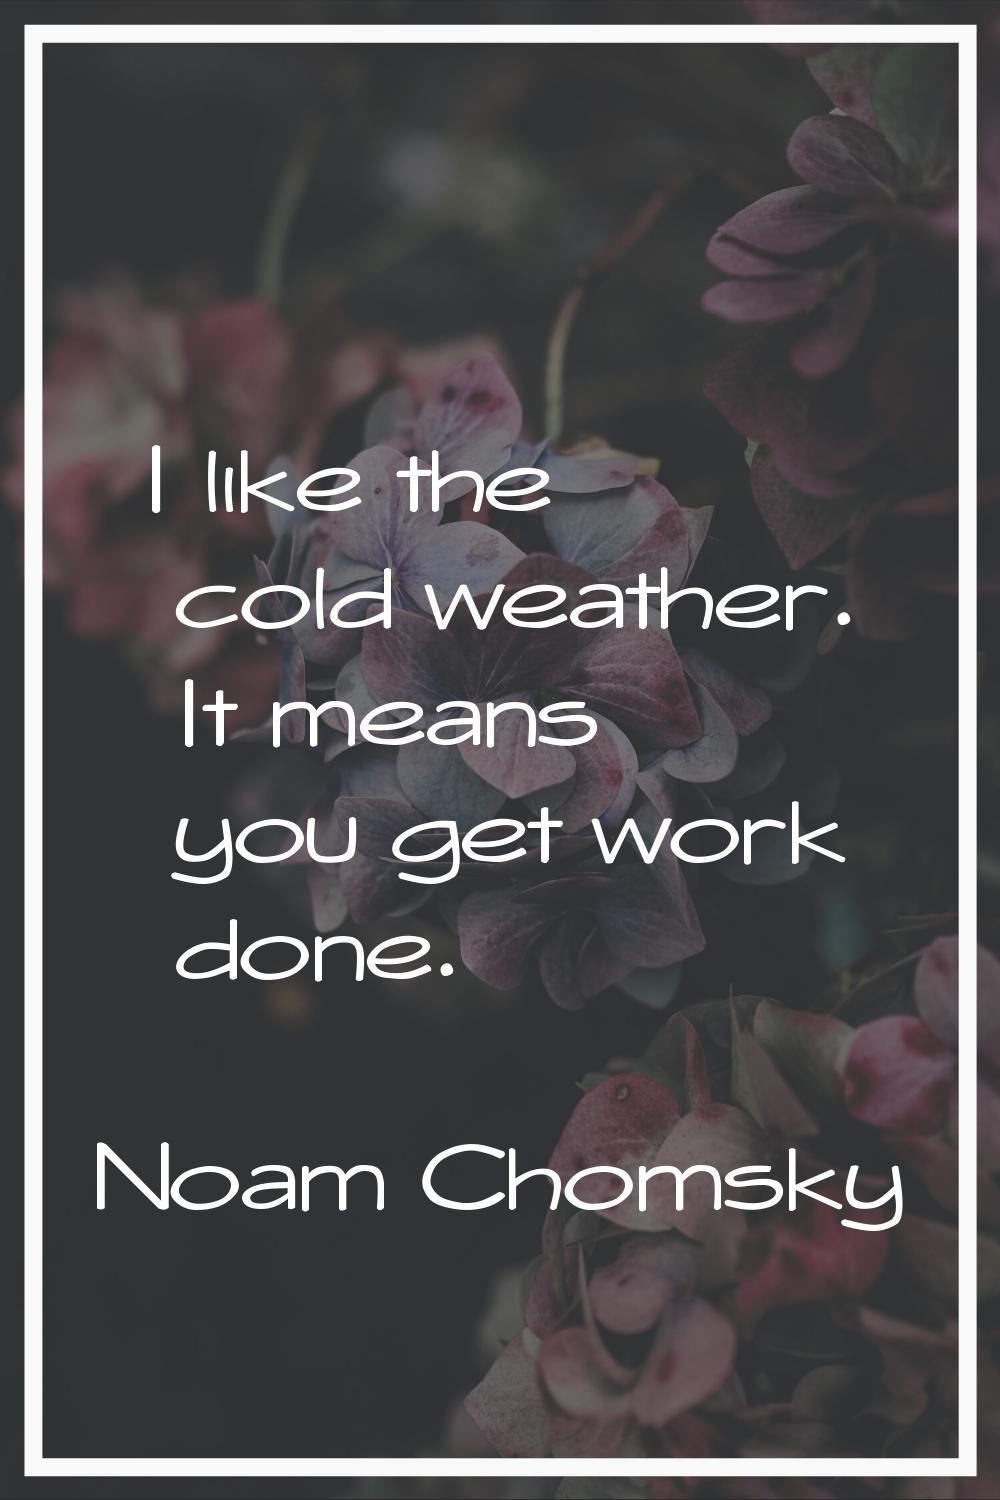 I like the cold weather. It means you get work done.